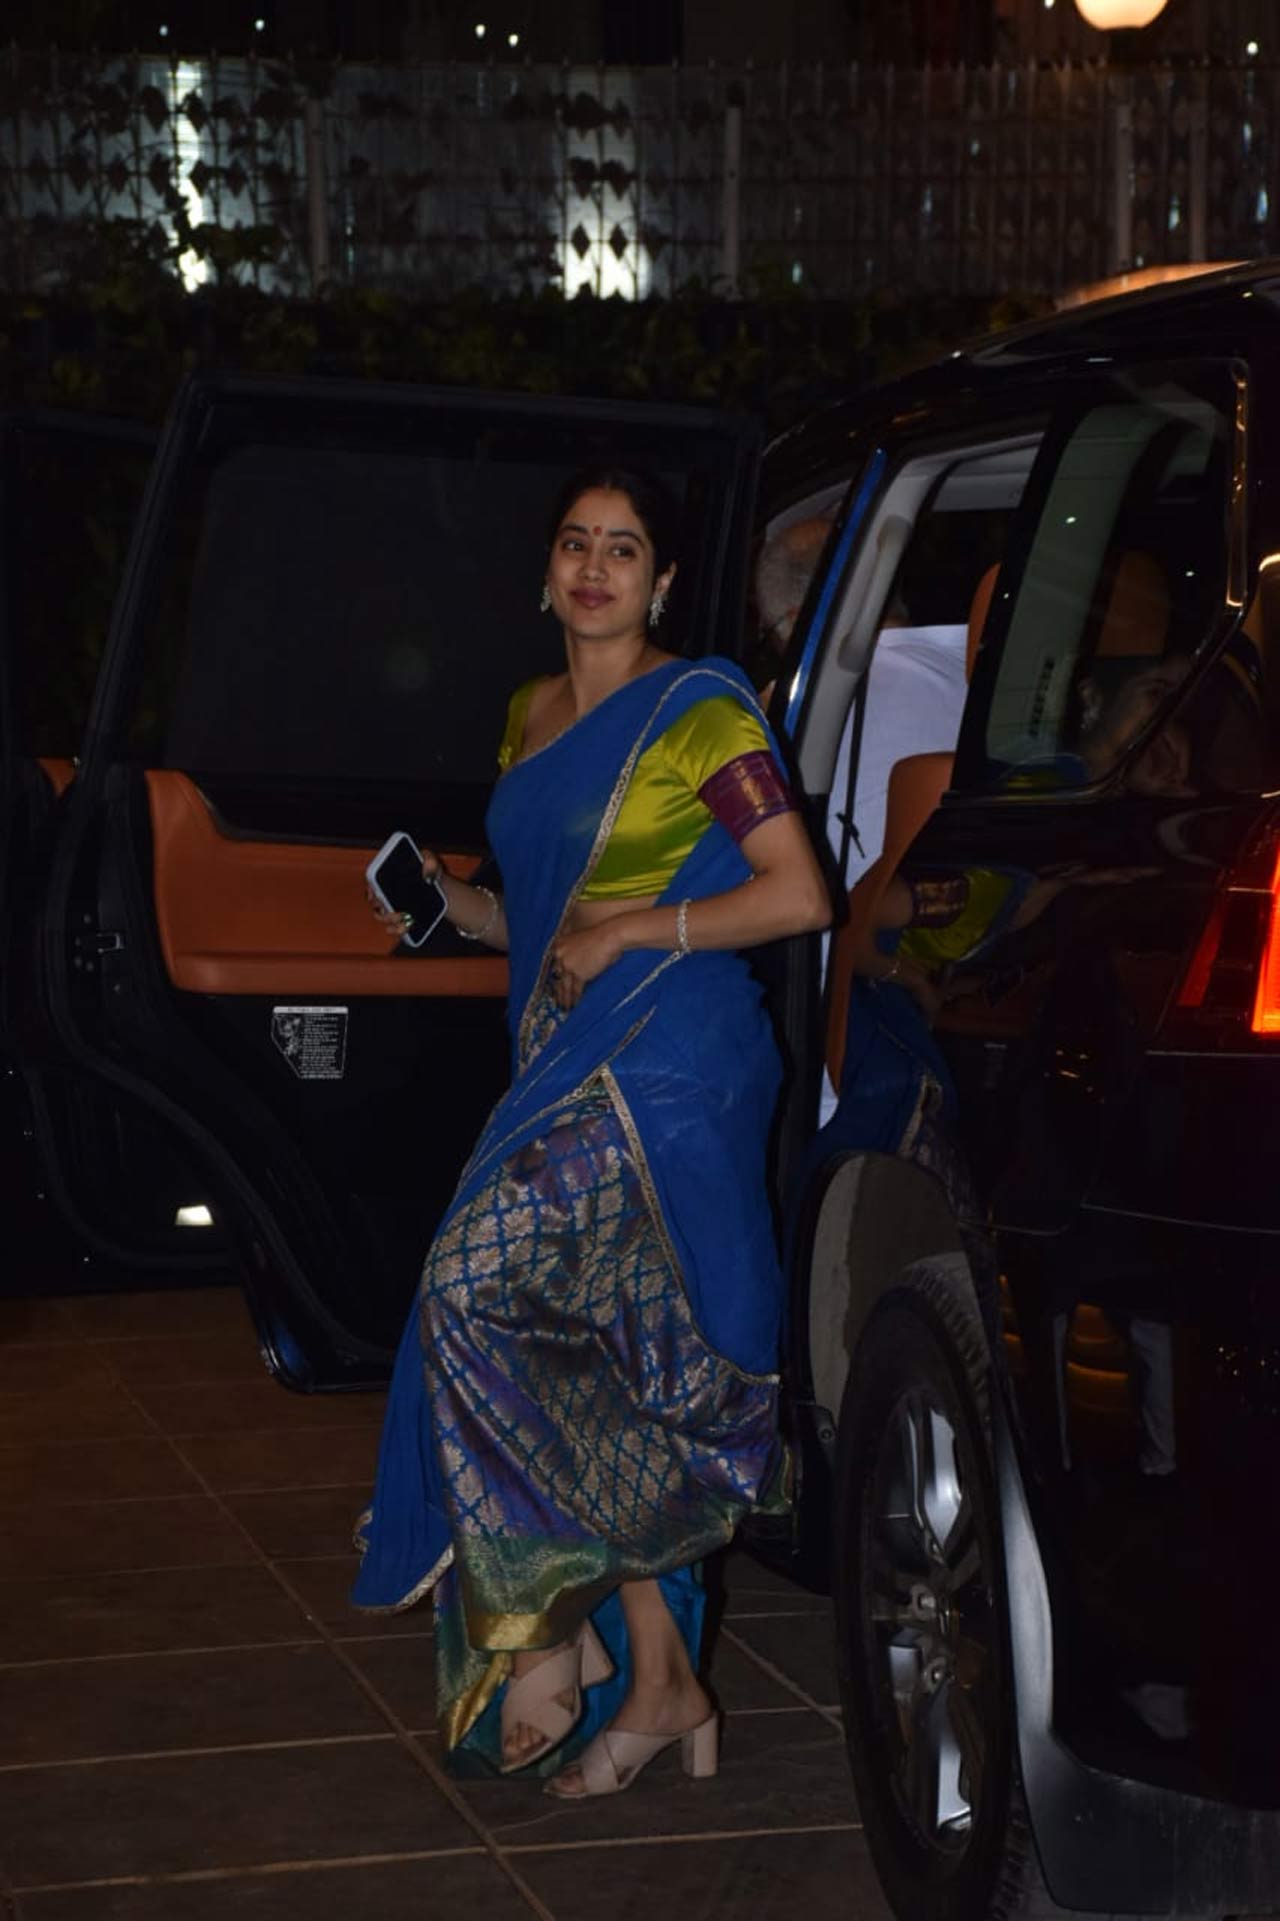 Janhvi Kapoor dressed up in a pretty south Indian attire as she attended Diwali puja at her father Boney Kapoor's office in Juhu. She paired her lime green blouse with a Kanjeevaram skirt and blue dupatta for the celebration.